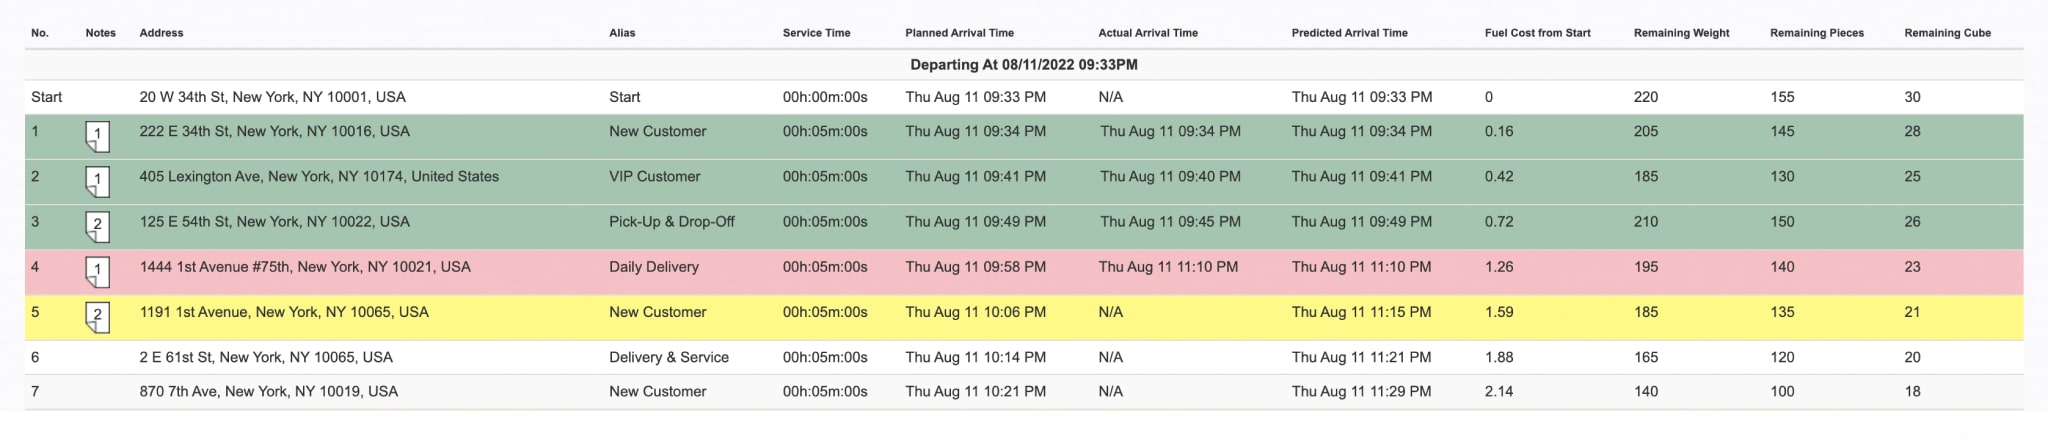 Route stops color coding for on-time and late arrivals in the dynamic route manifest.